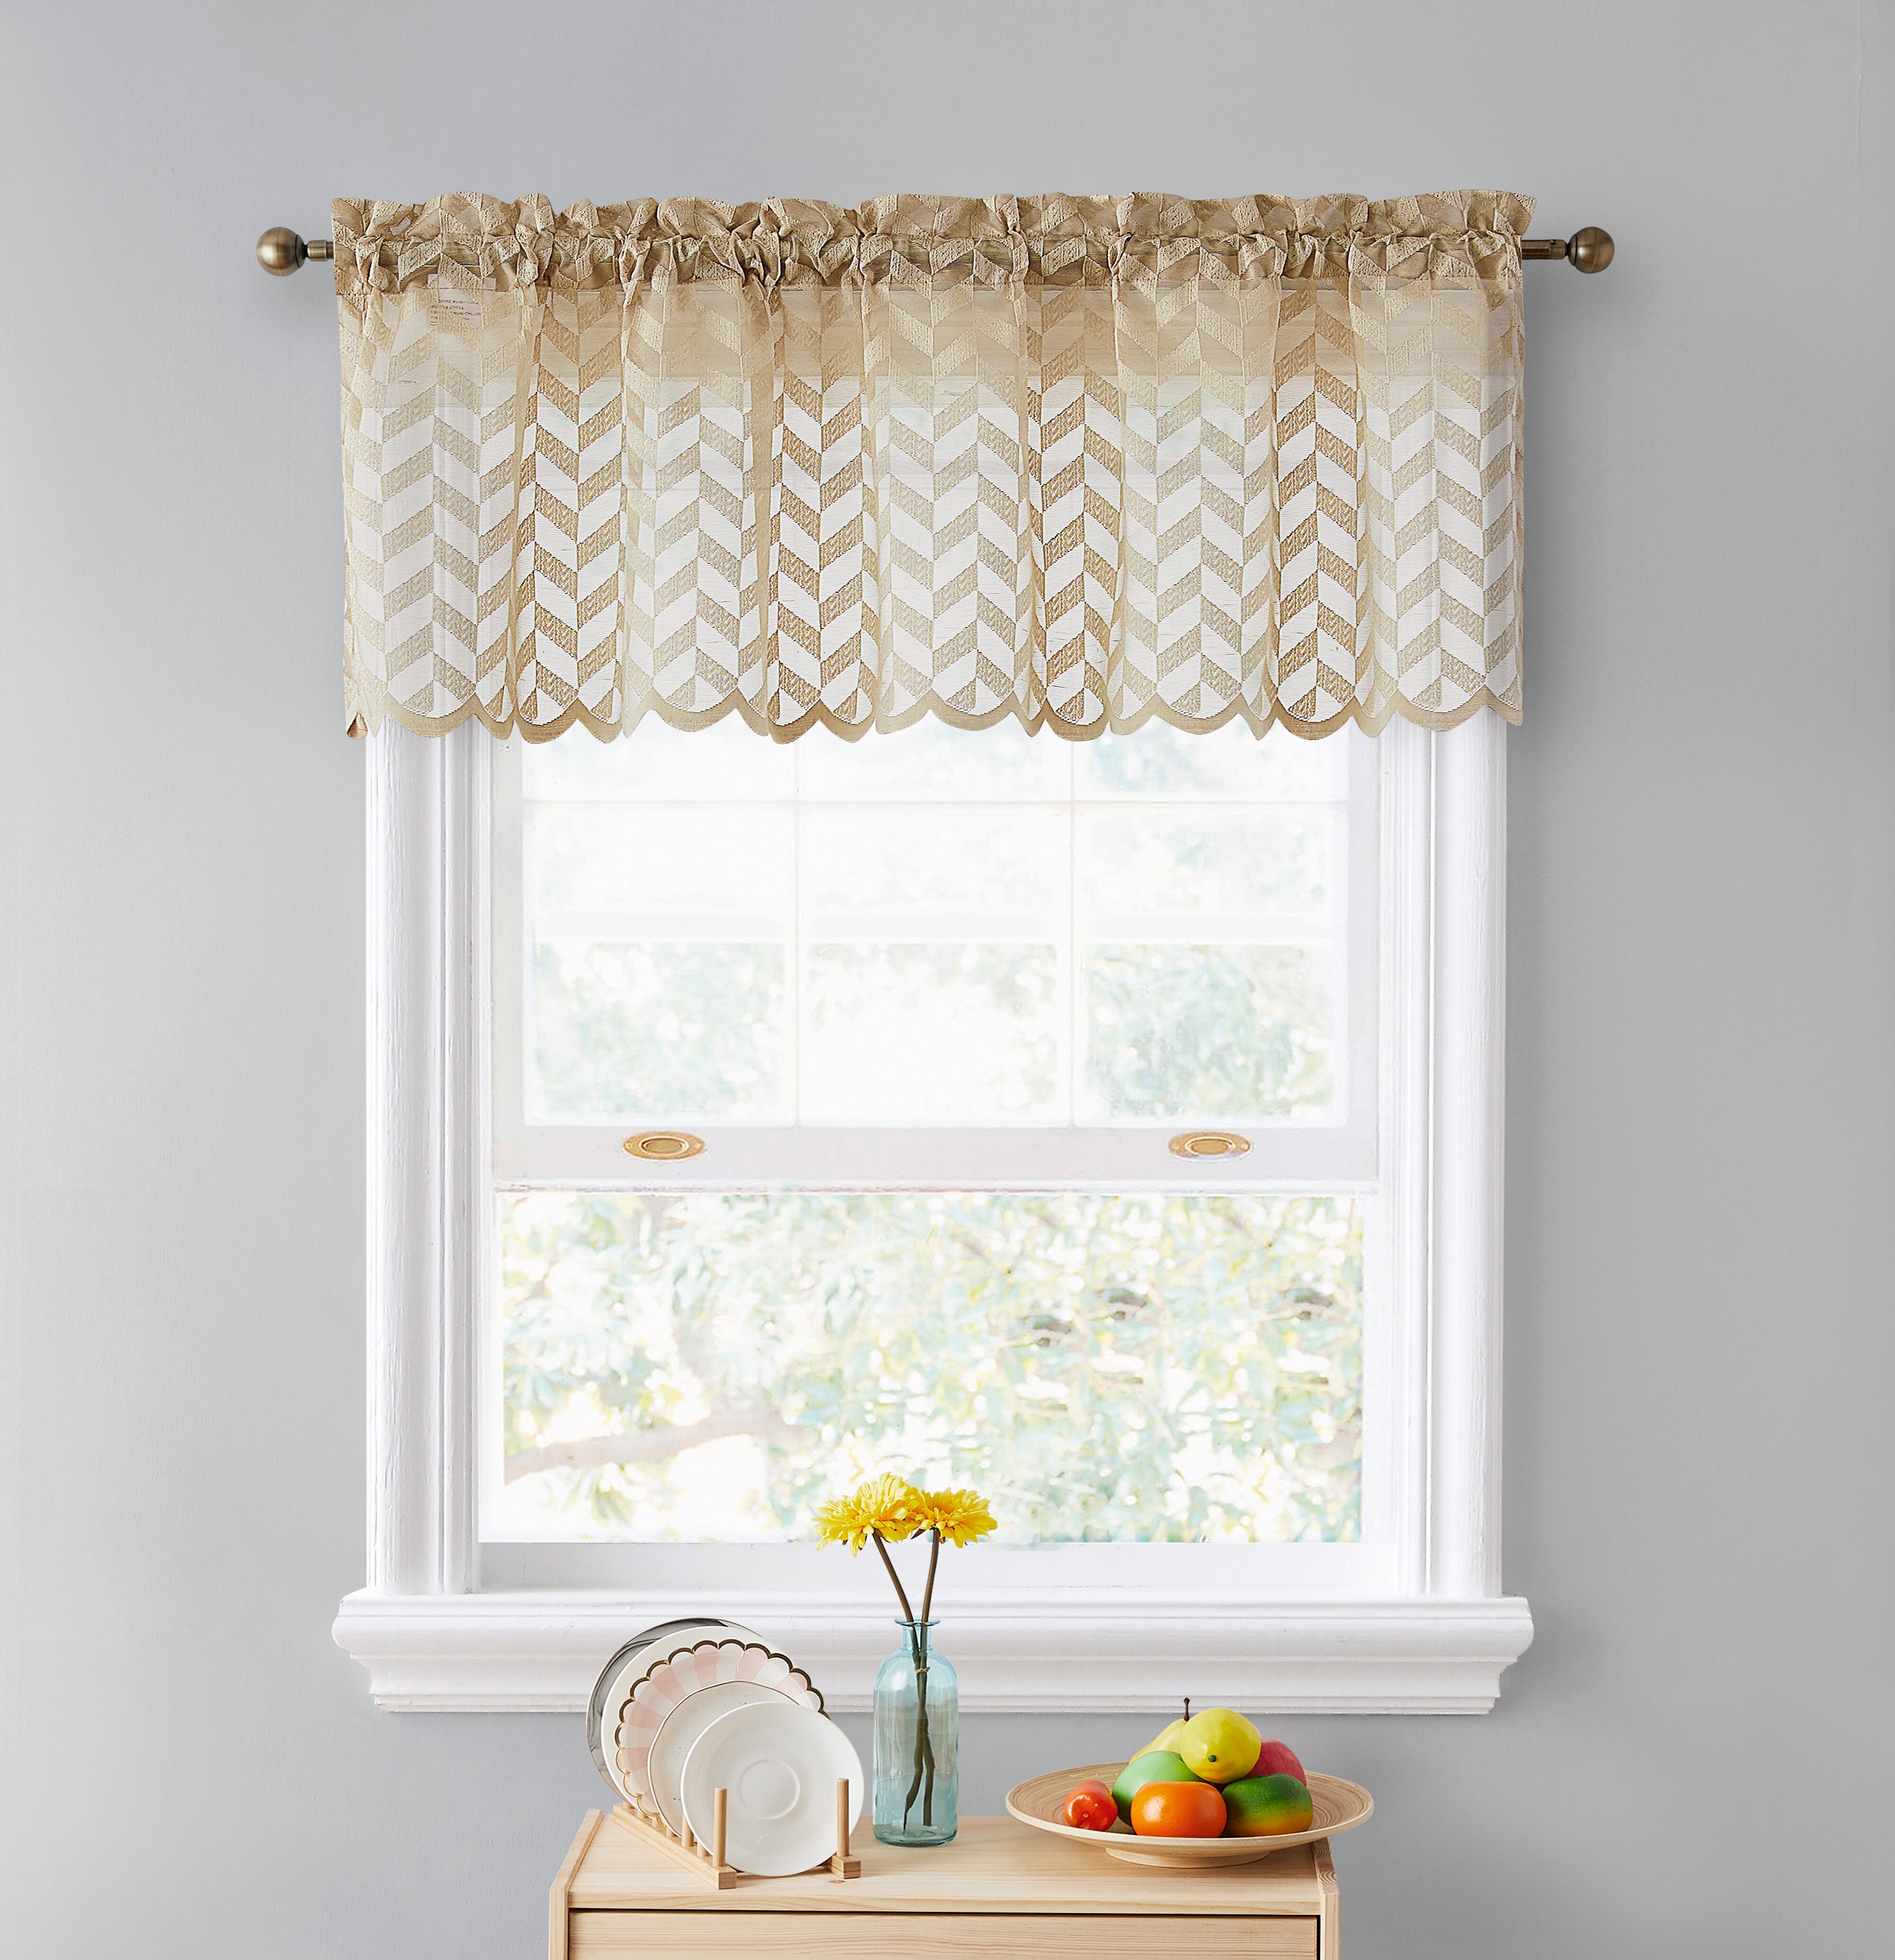 Fresh Kitchen Decor Window Drapes Valance Rectangle Home Cabinet Sheer Curtains 